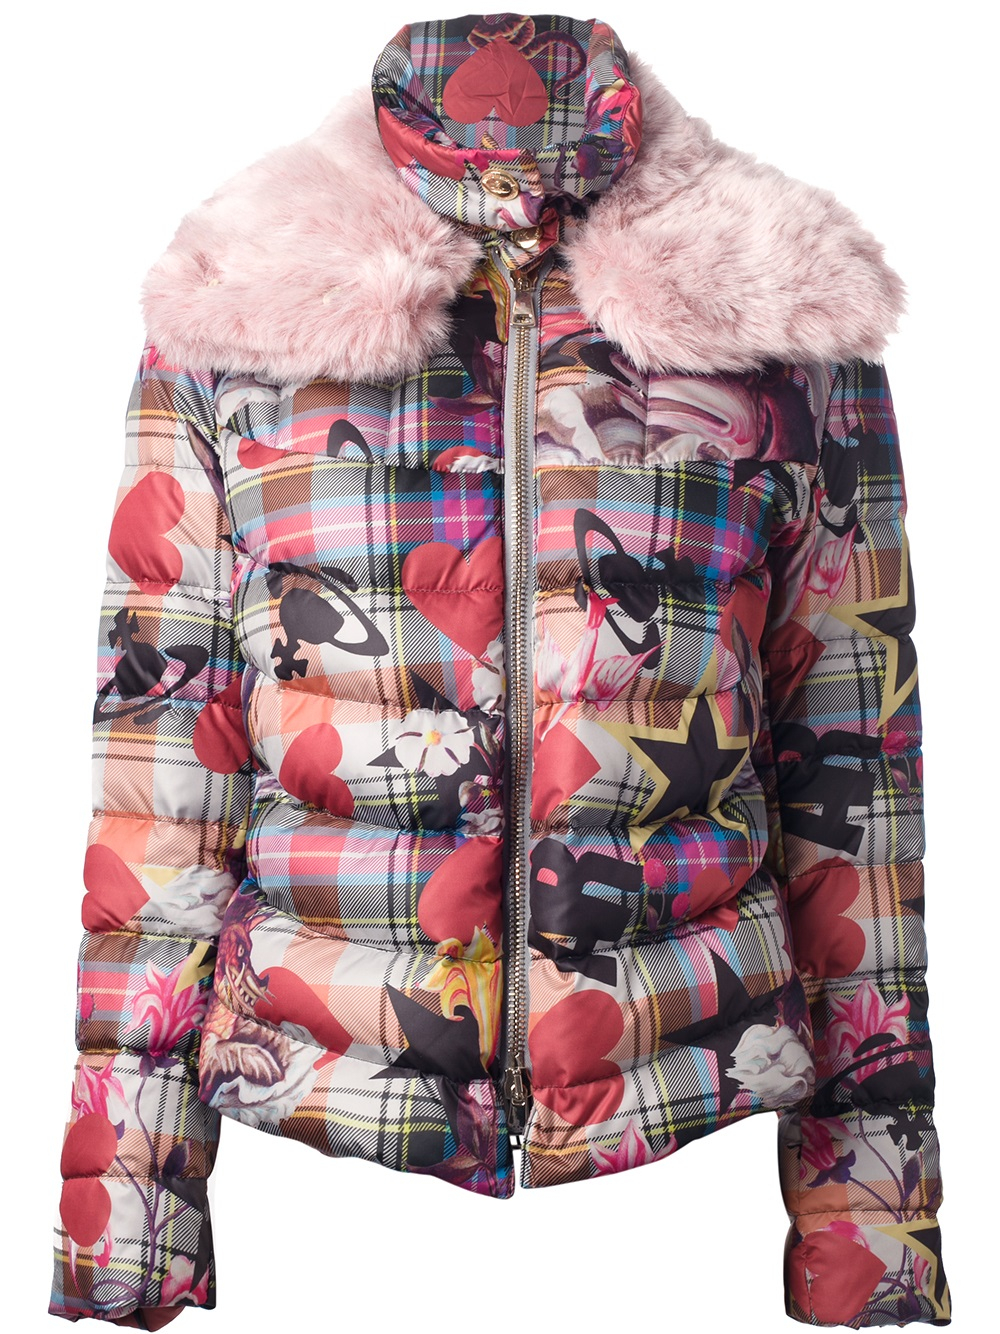 Vivienne Westwood Anglomania Reservation Printed Puffer Jacket 